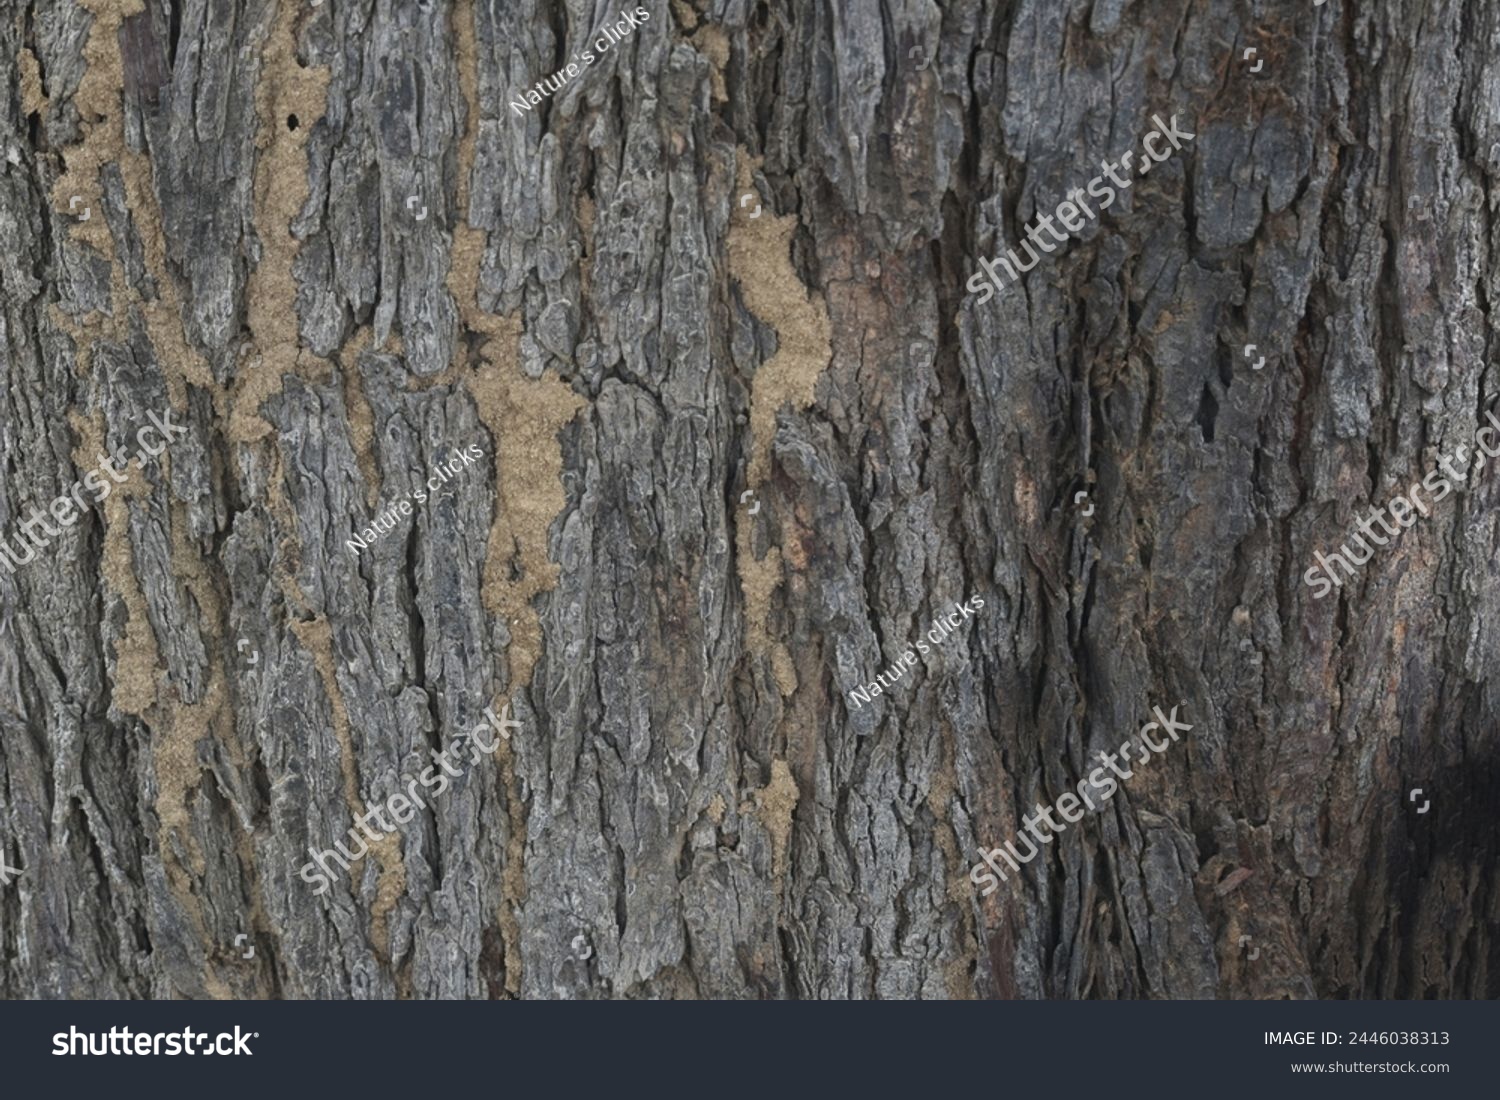 Old tree texture. Bark pattern, For background wood work, Bark of brown hardwood, thick bark hardwood, residential house wood. nature, tree, bark, hardwood, trunk, tree , tree trunk close up texture #2446038313